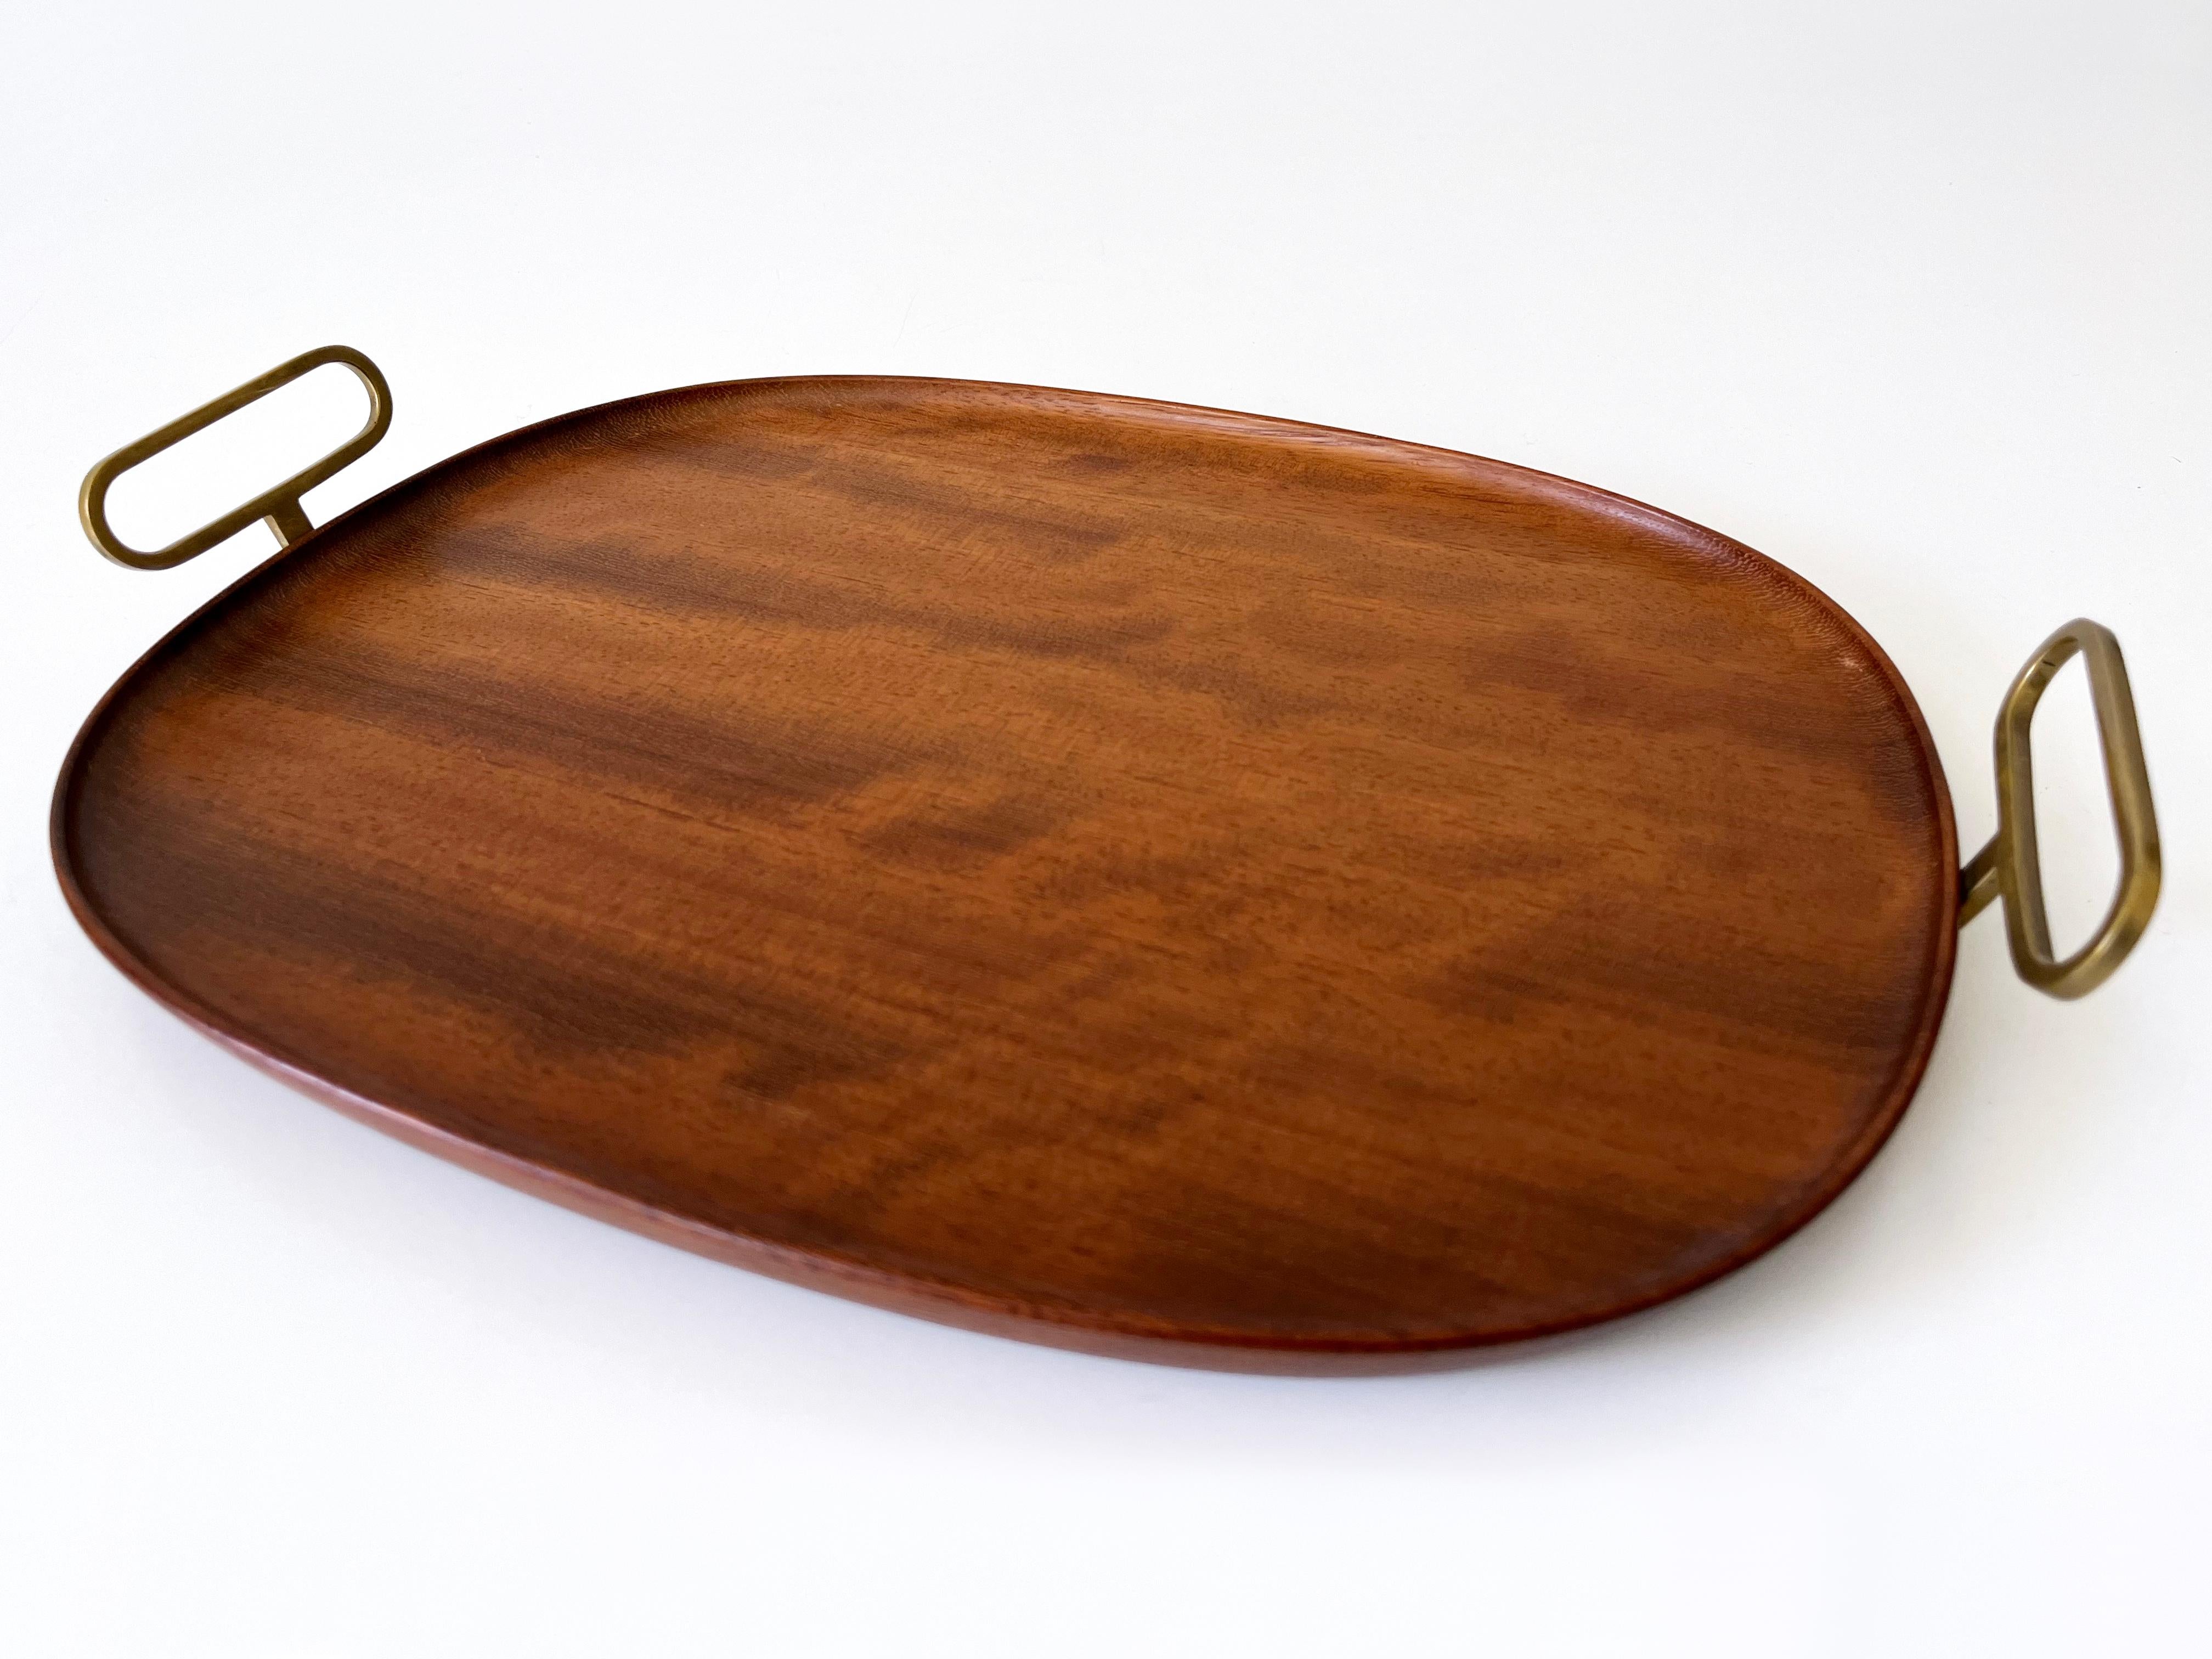 Austrian Extremely Rare Mid-Century Modern Teak Serving Tray by Carl Auböck Austria 1950s For Sale